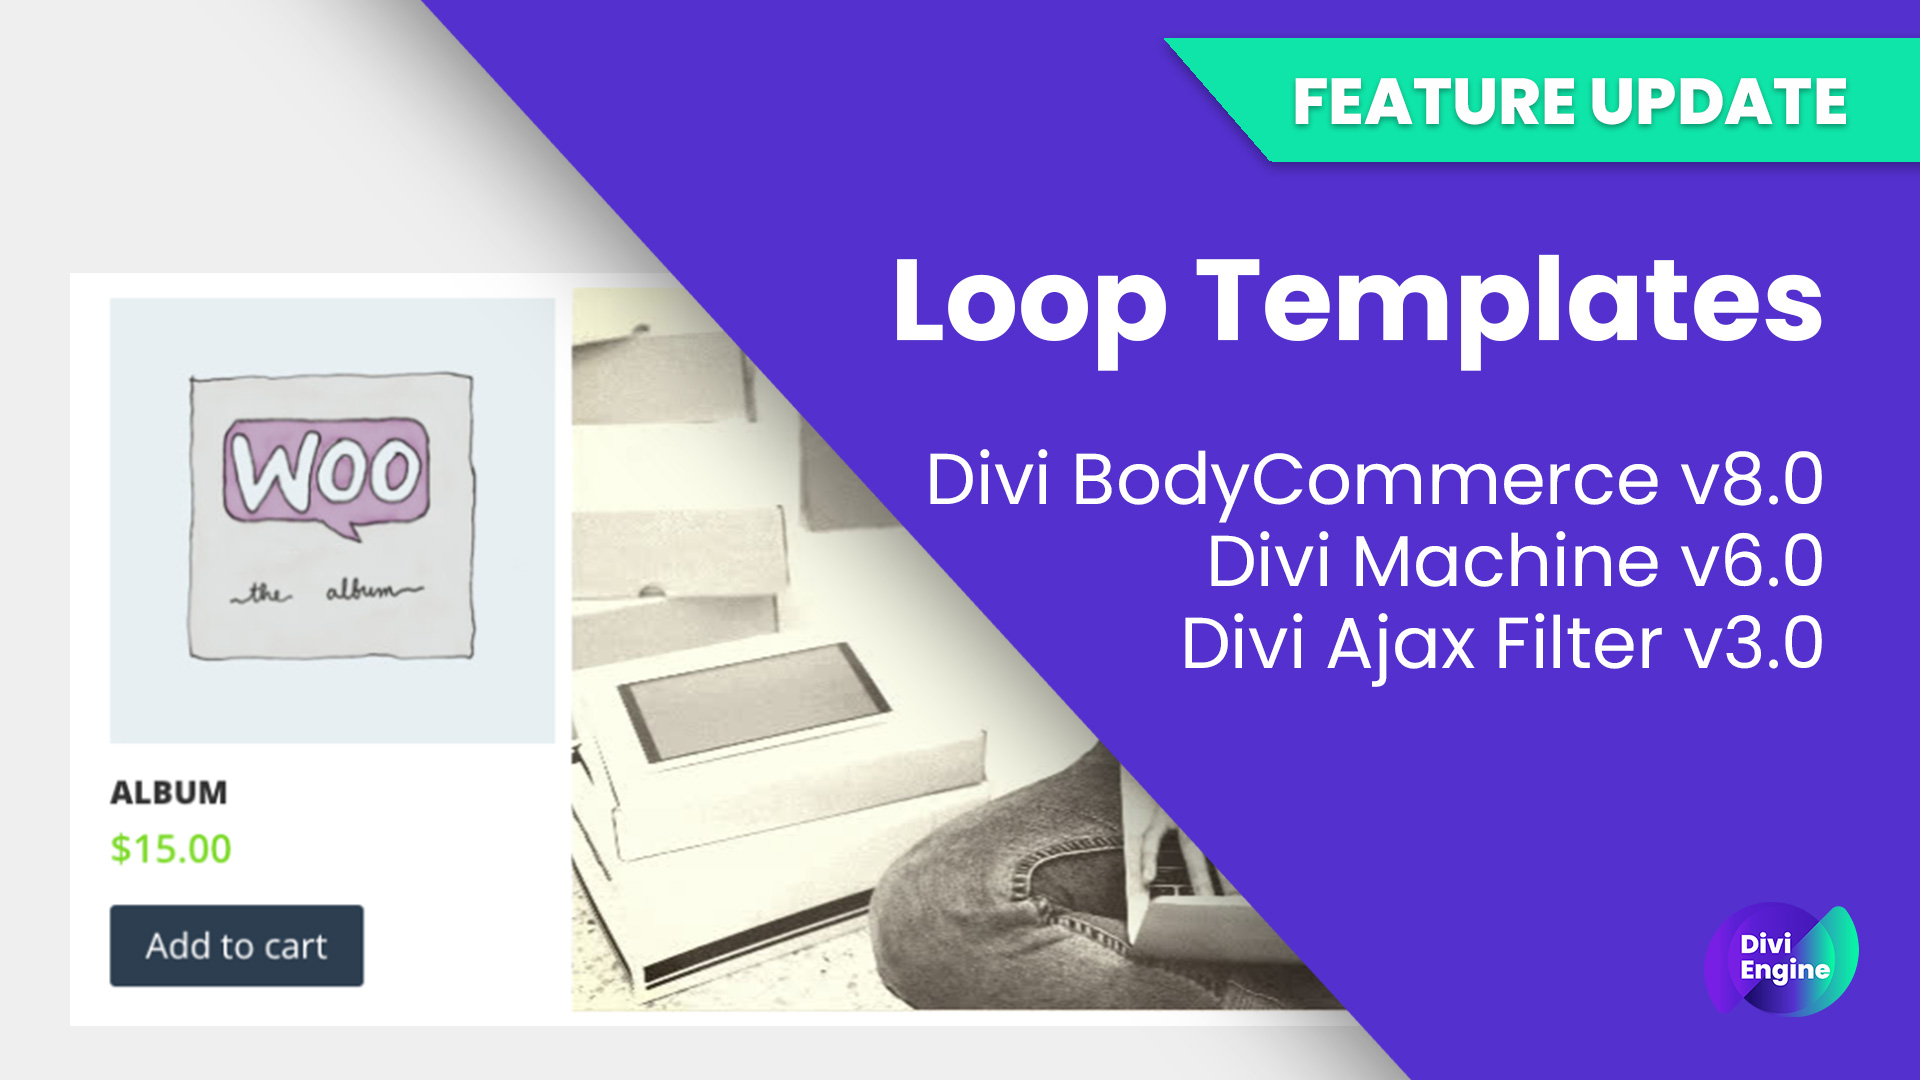 Feature Update: Loop Layout Templates for Divi has been added to multiple plugins